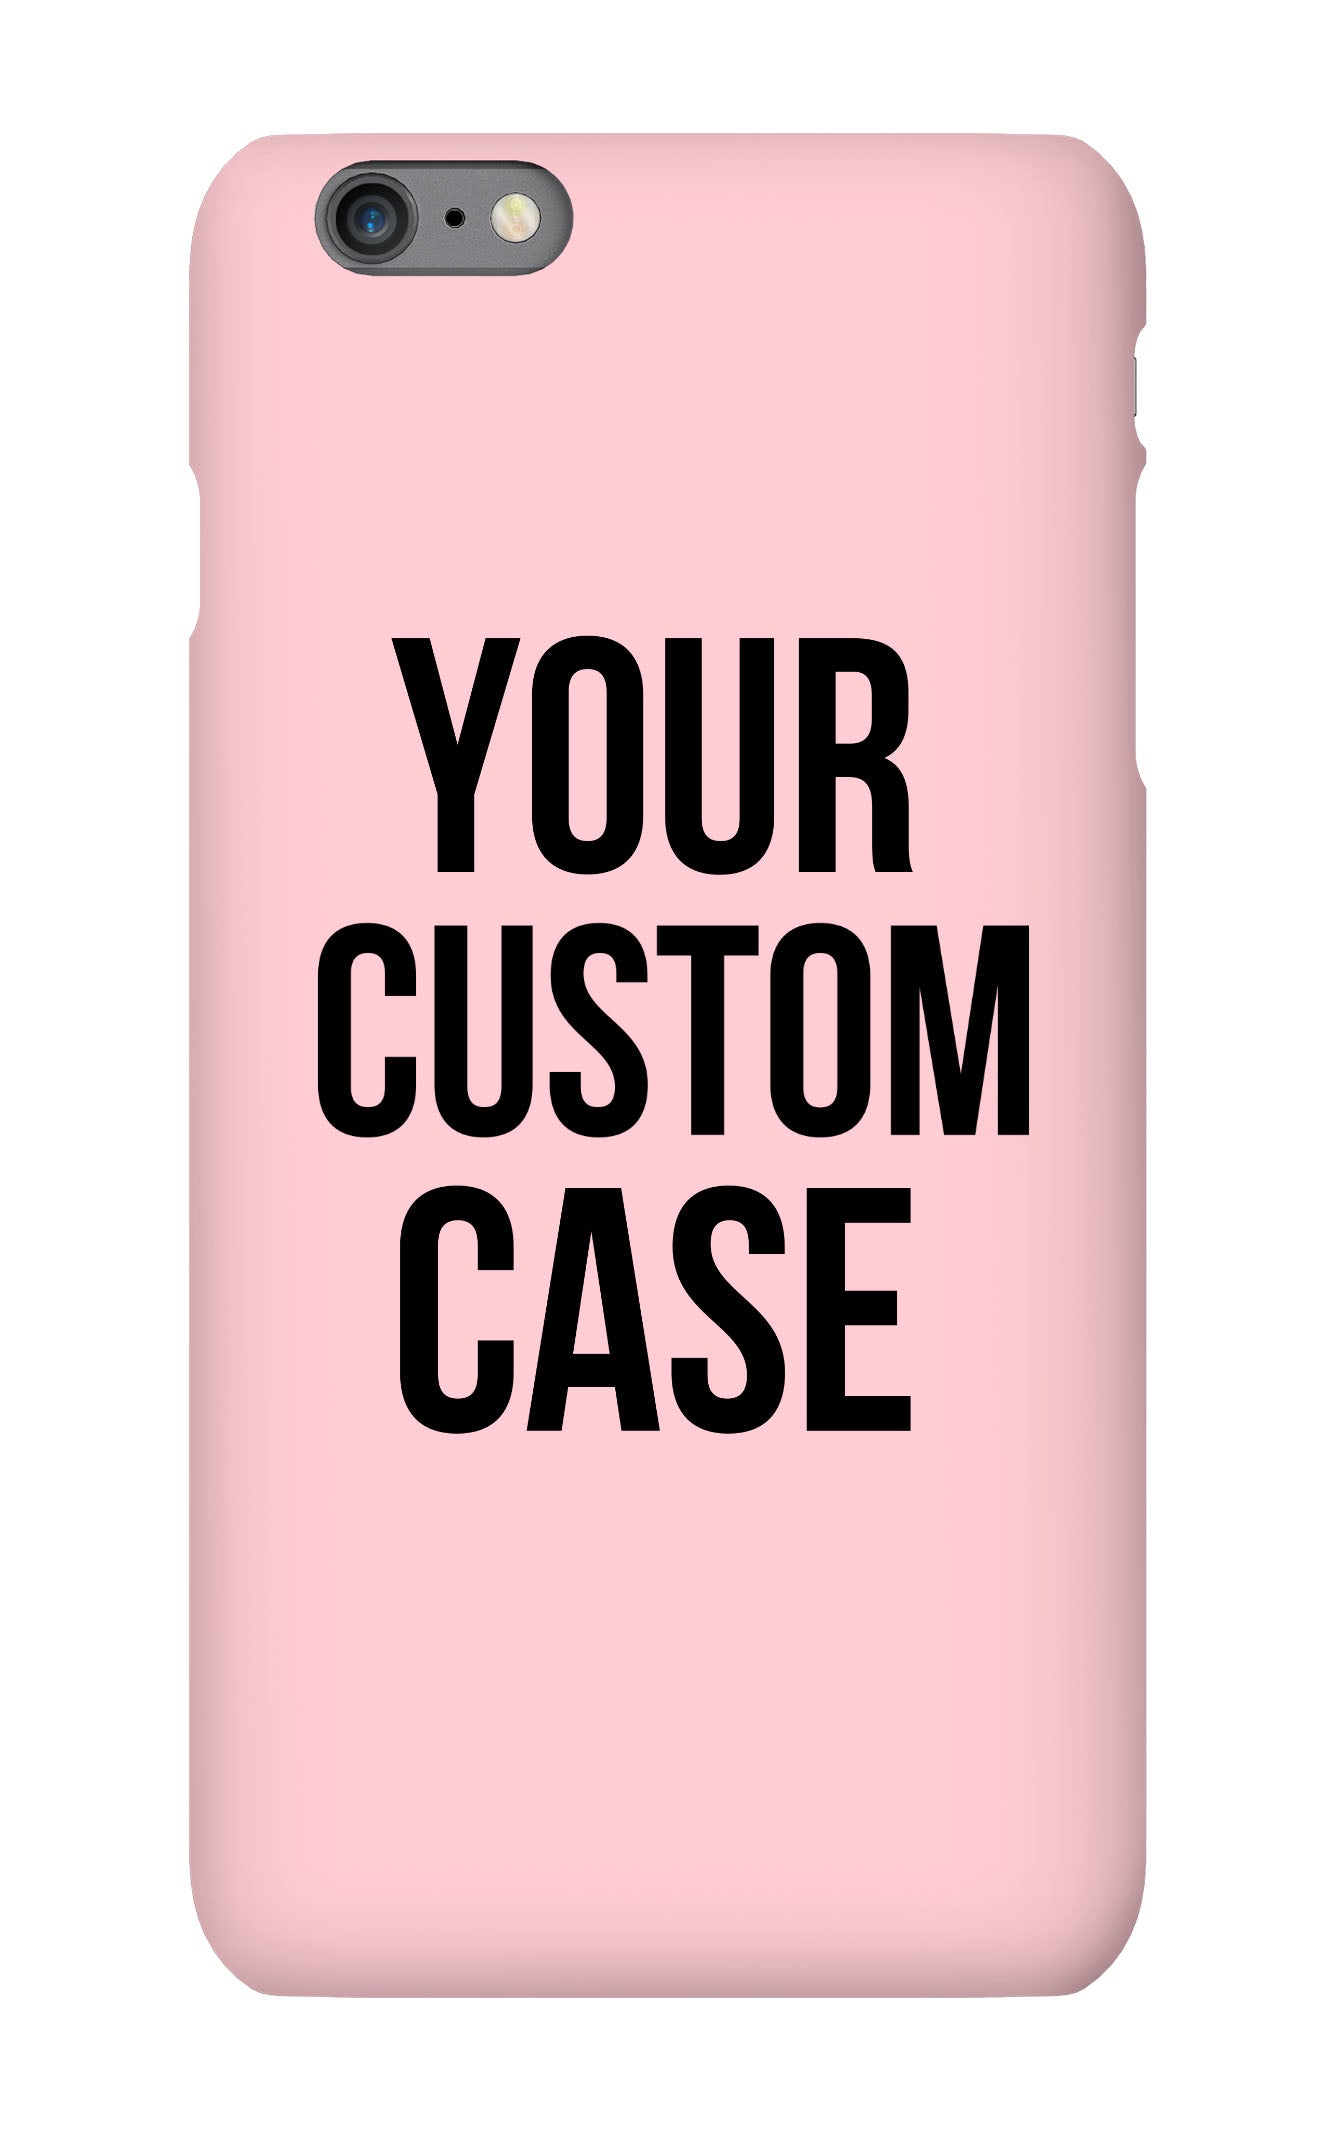 Custom iPhone 6 / 6S Plus Slim Case - Your Custom Design in Cart will be Shipped - Pixly Case